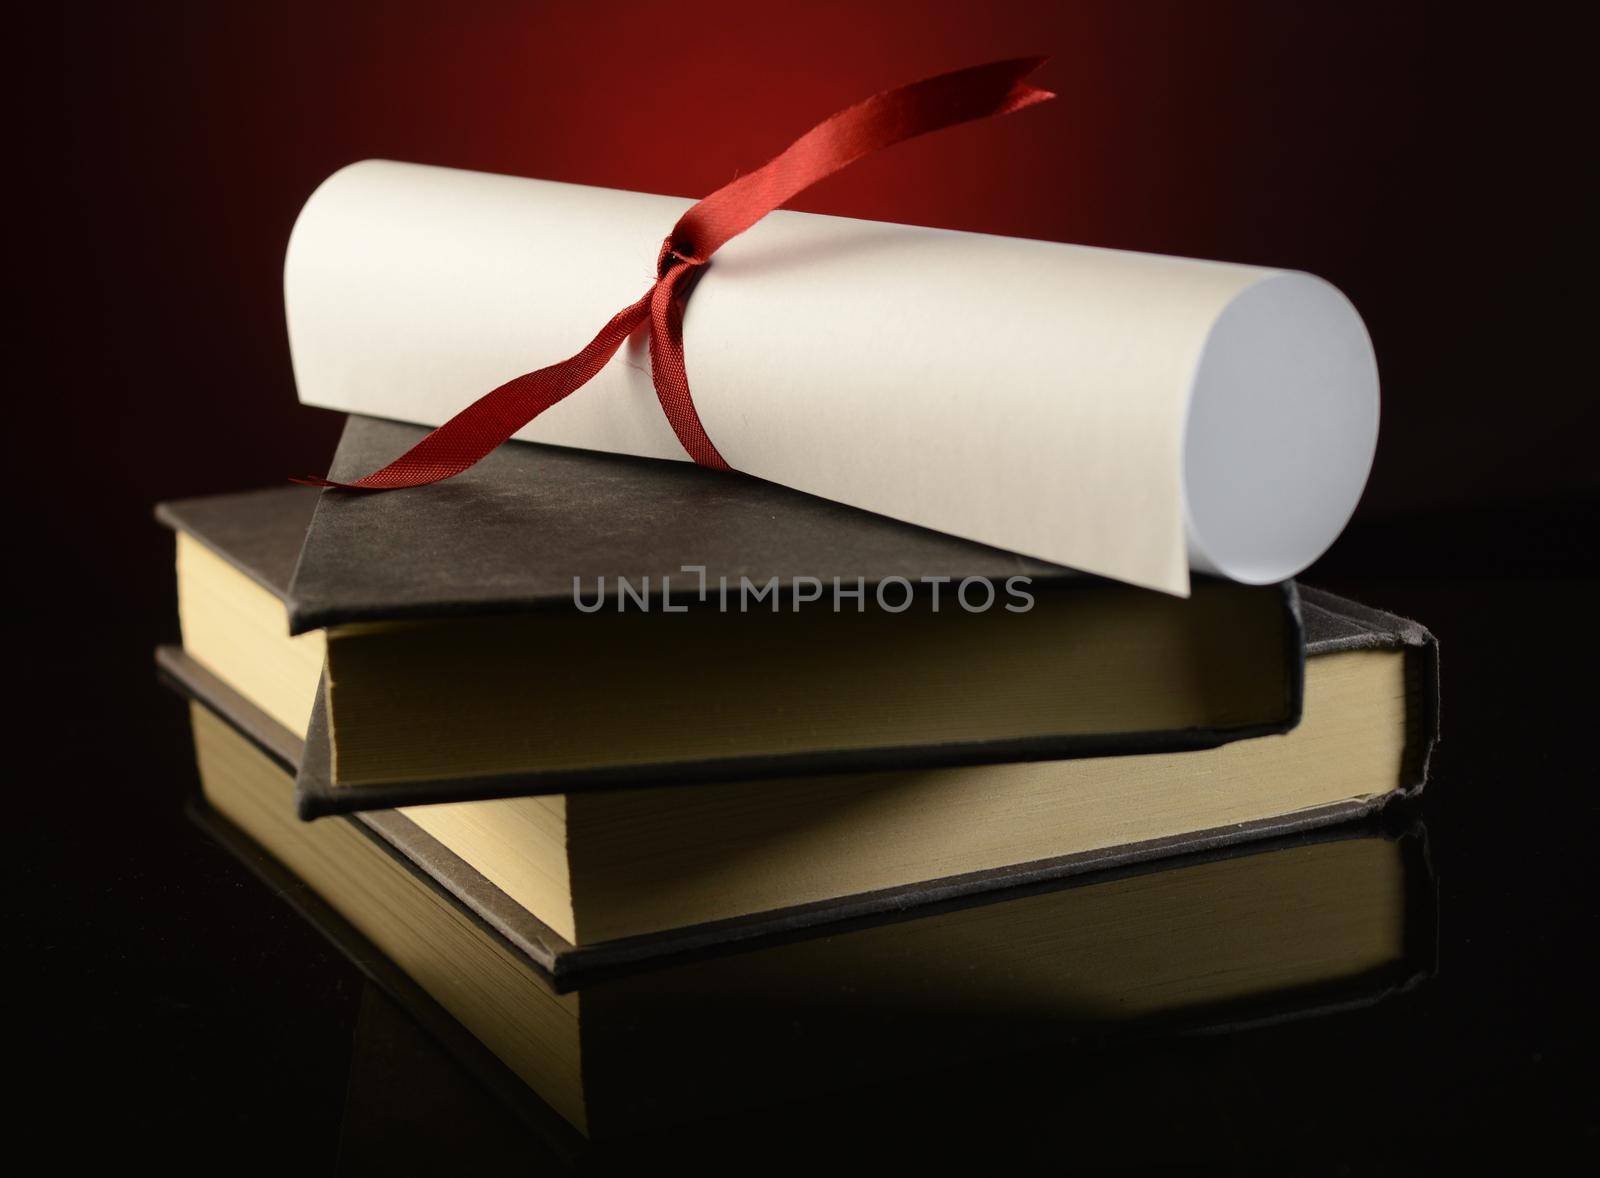 A diploma on top of a couple books shows the successful payoff of school studies.